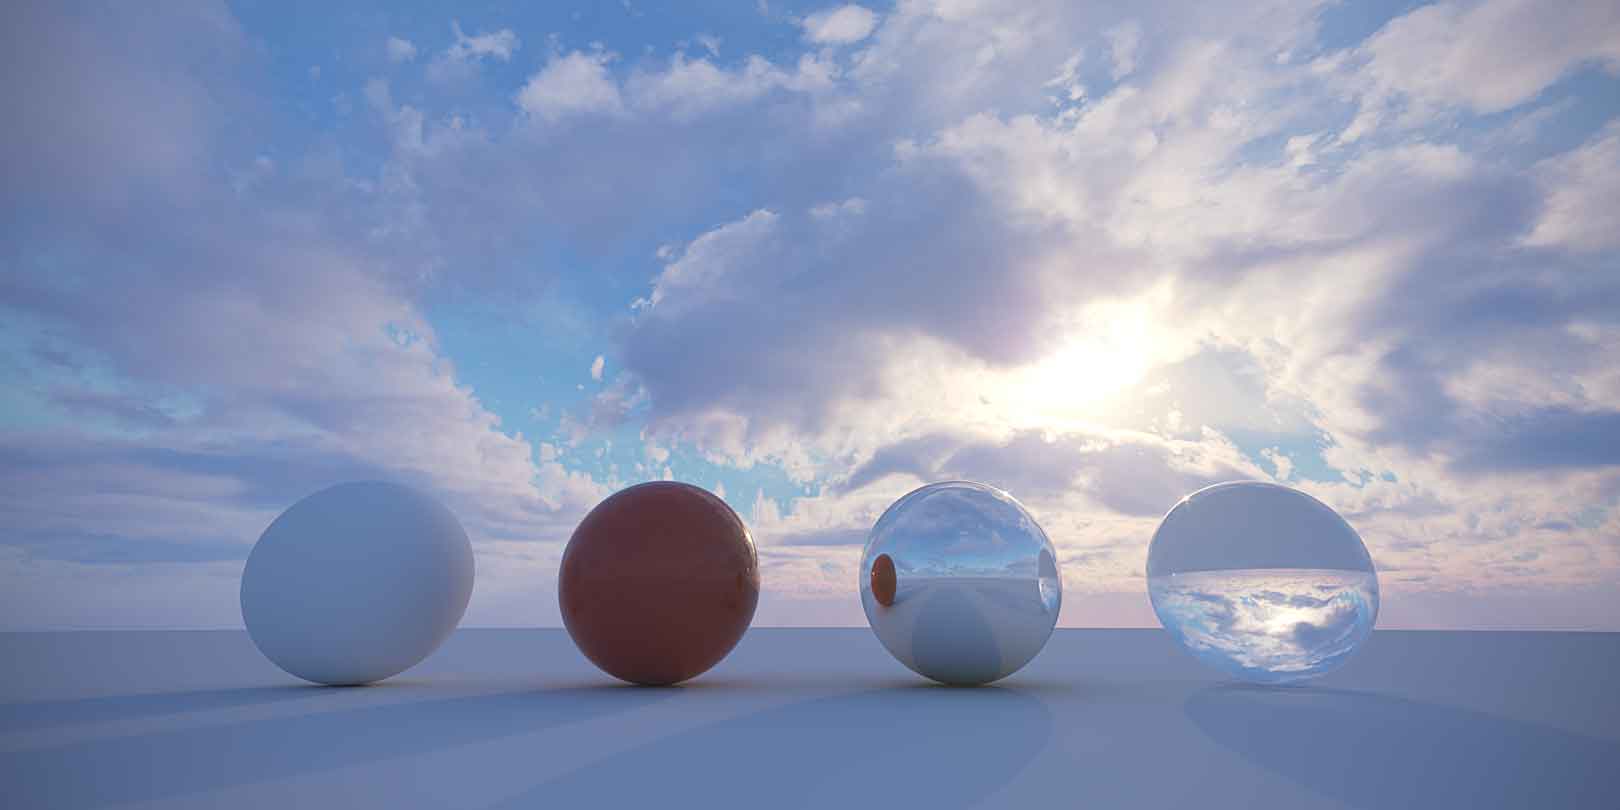 CG HDRI / Winter Skies from helloluxx by Shawn Astrom